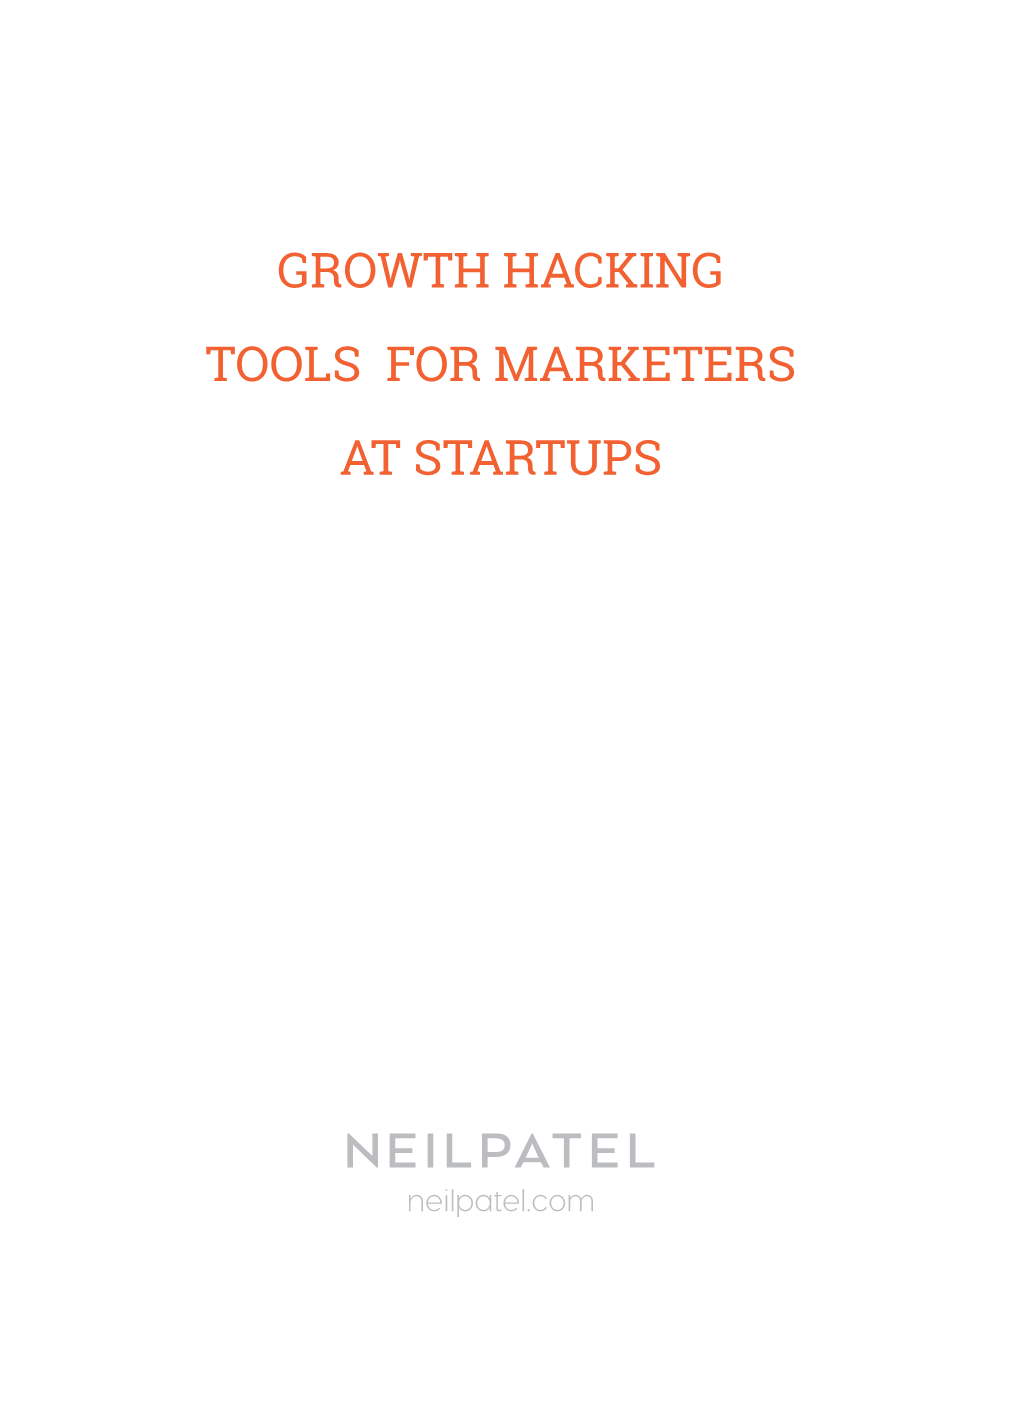 Growth Hacking Tools for Marketers at Startups